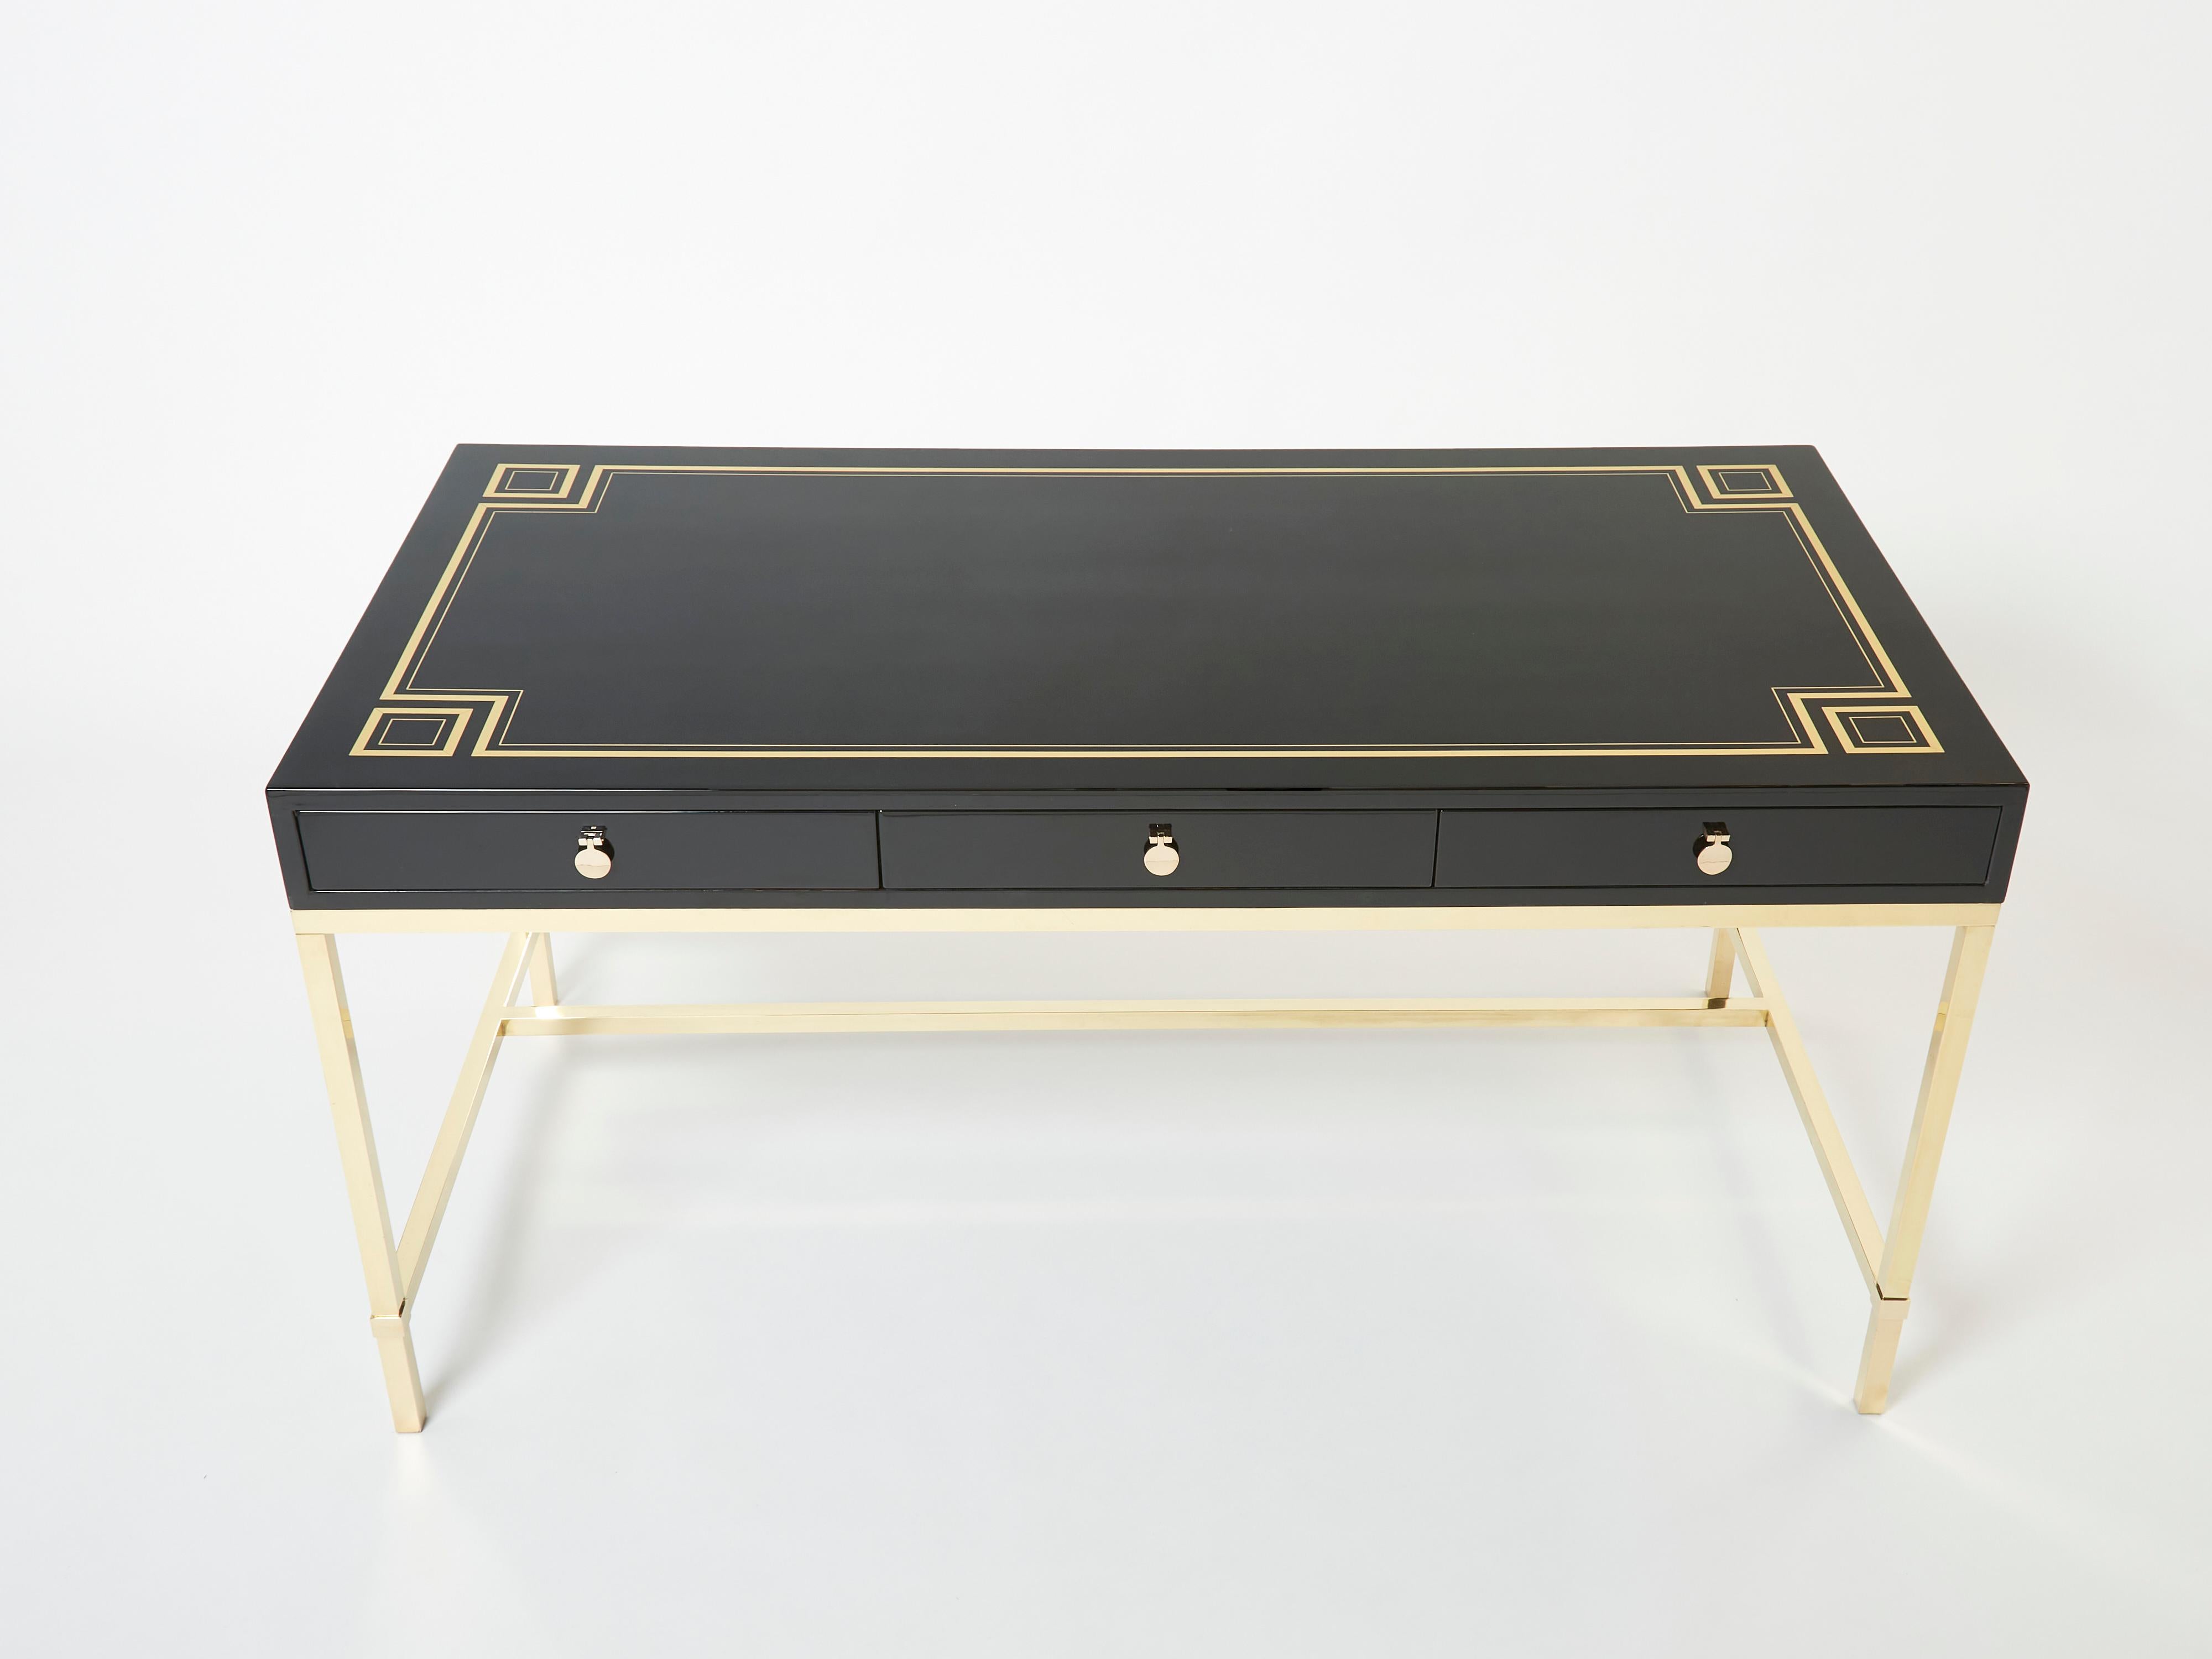 A unique Maison Jansen black lacquered desk table designed by Guy Lefevre for Maison Jansen in the mid-1970s. It features a black lacquer top with neoclassical inspired brass inlays, and three drawers with beautiful brass handles, resting on a